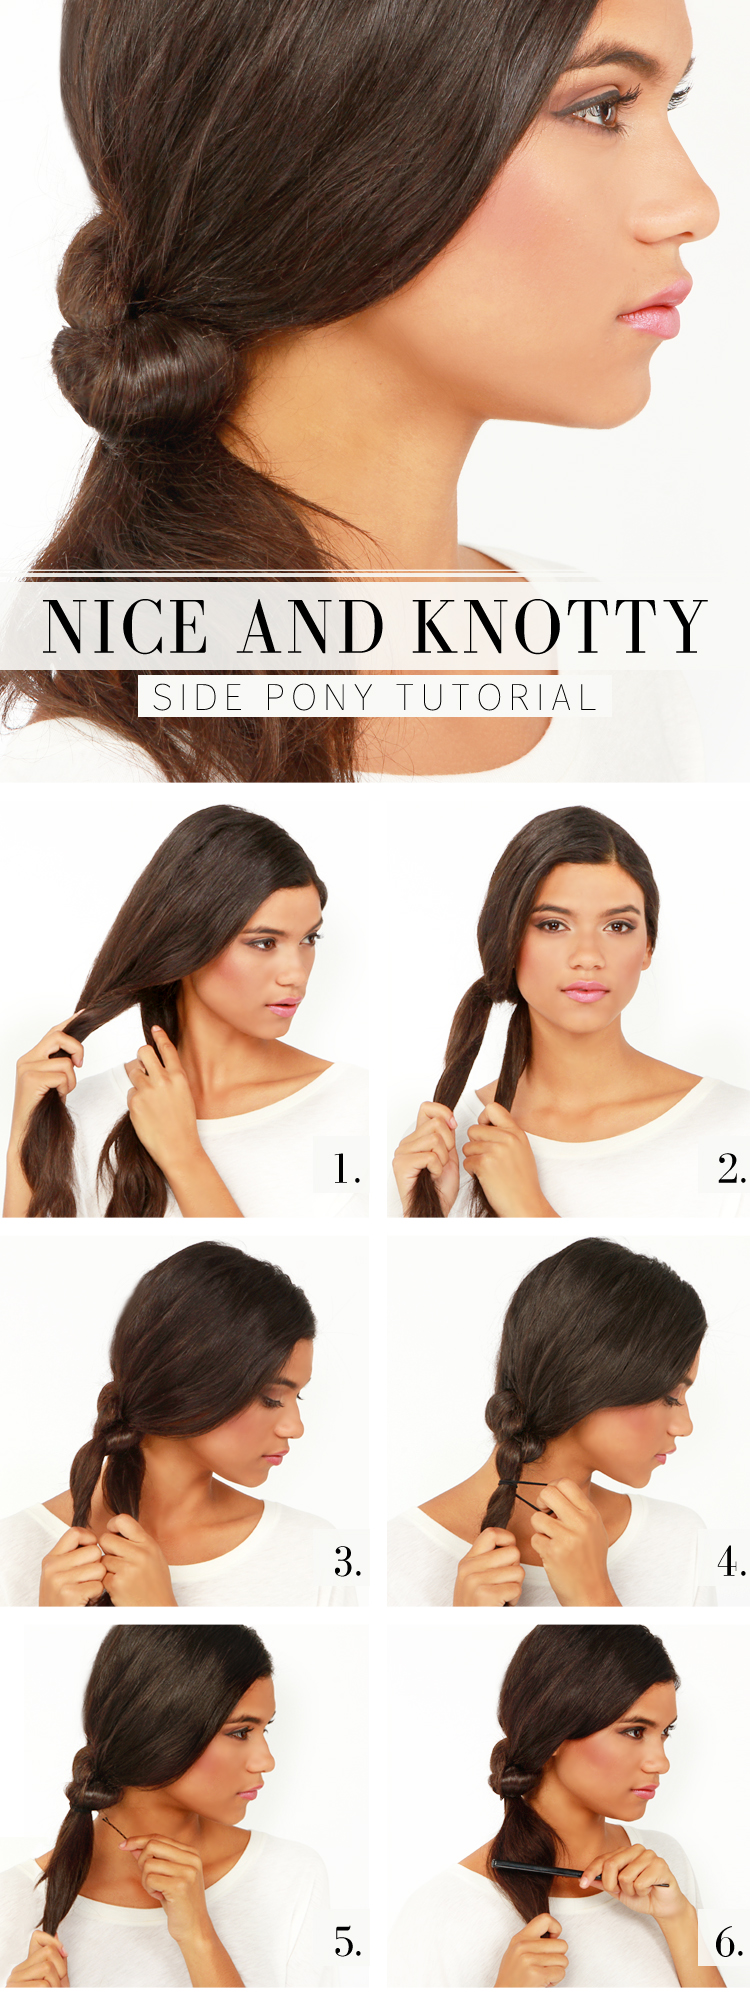 Sideways swept tutorial for knotty ponytail hairstyles